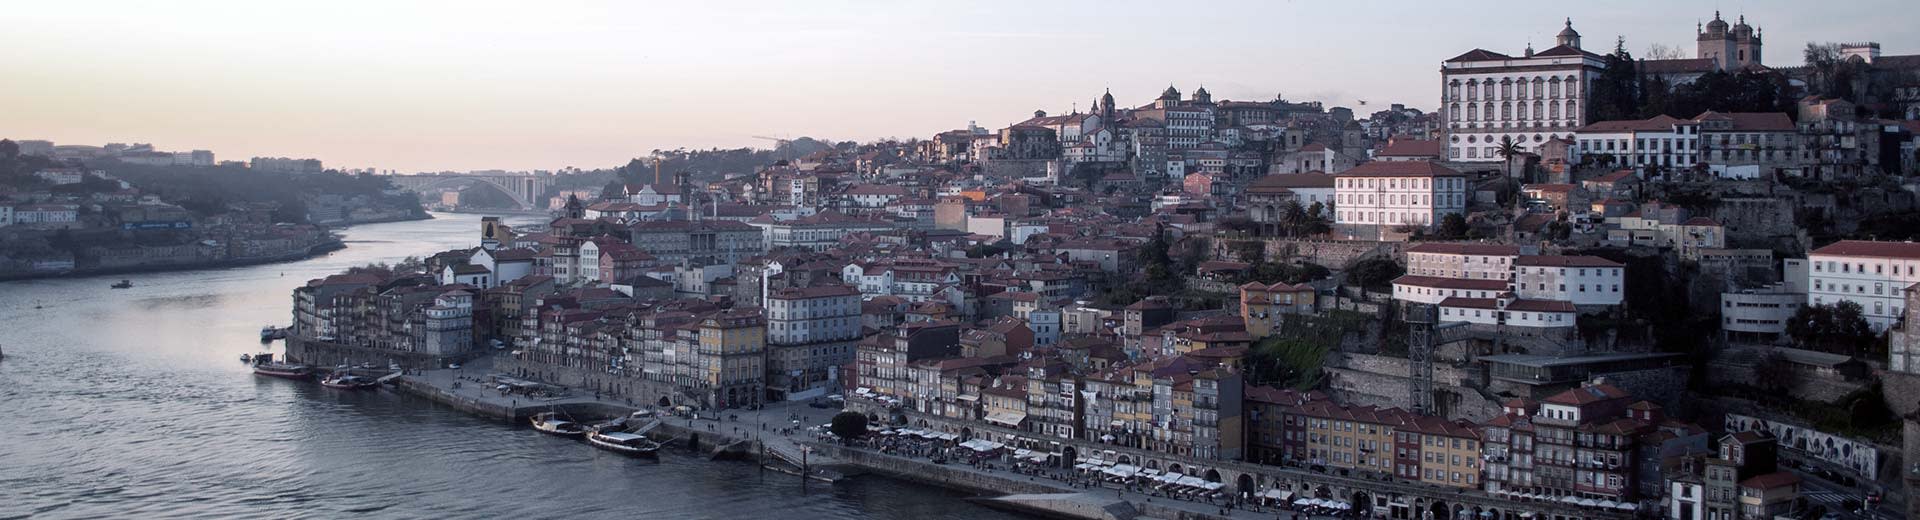 The beautiful city of Porto, with historic buildings set against a grey sky and flowing river.